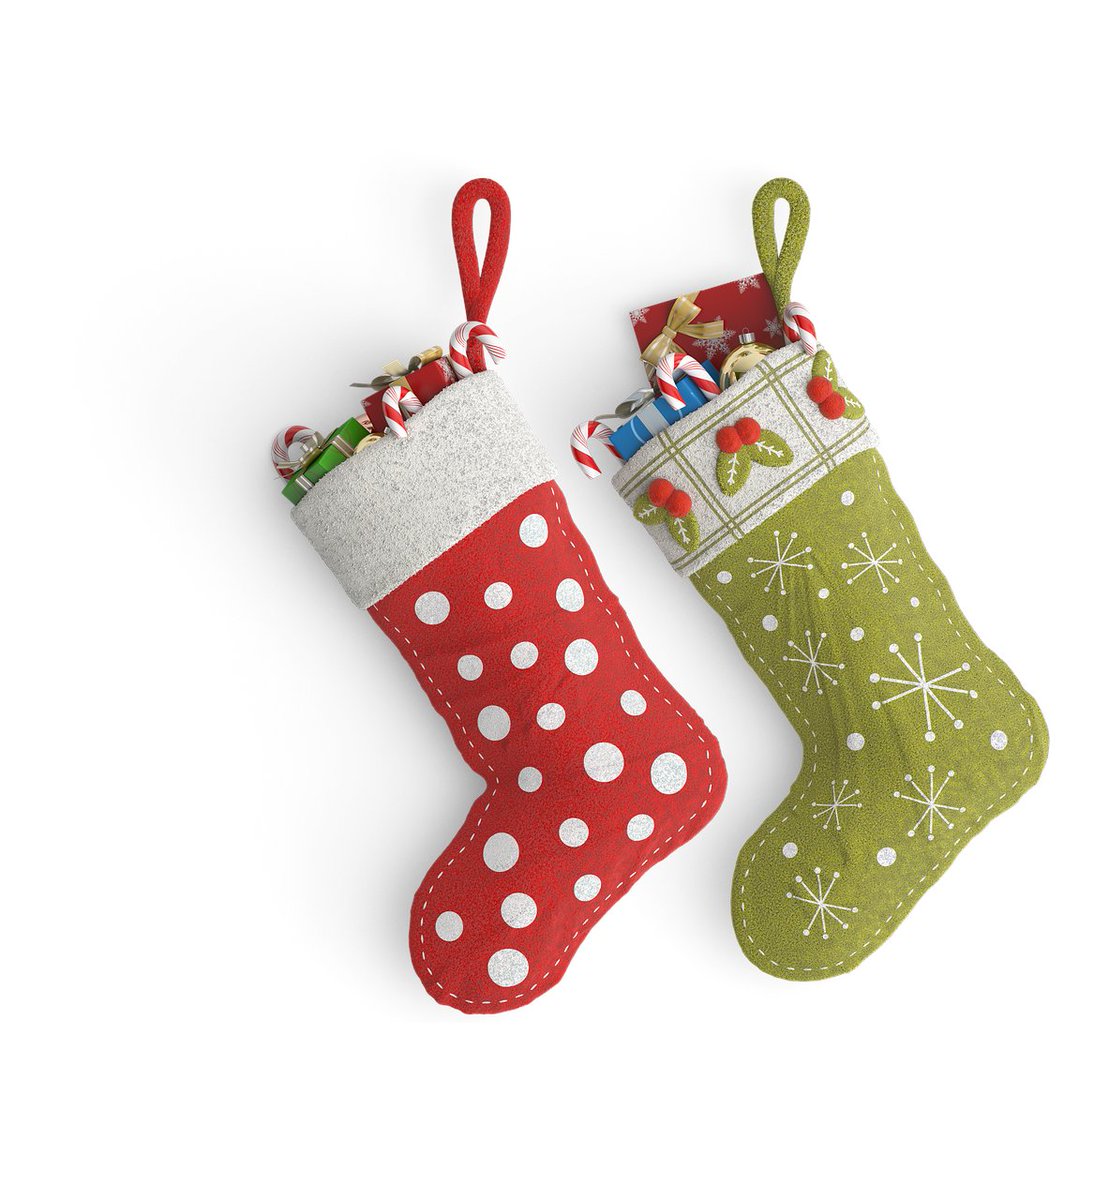 Annual holiday stocking stuffer article, brought to you by ATriathletesDiary.com is here. Check it out - atriathletesdiary.com/new-product-st… #triathlete #triathletelife #runner #runnerslife #run #fun #passion #love #gifts #giftgivingseason